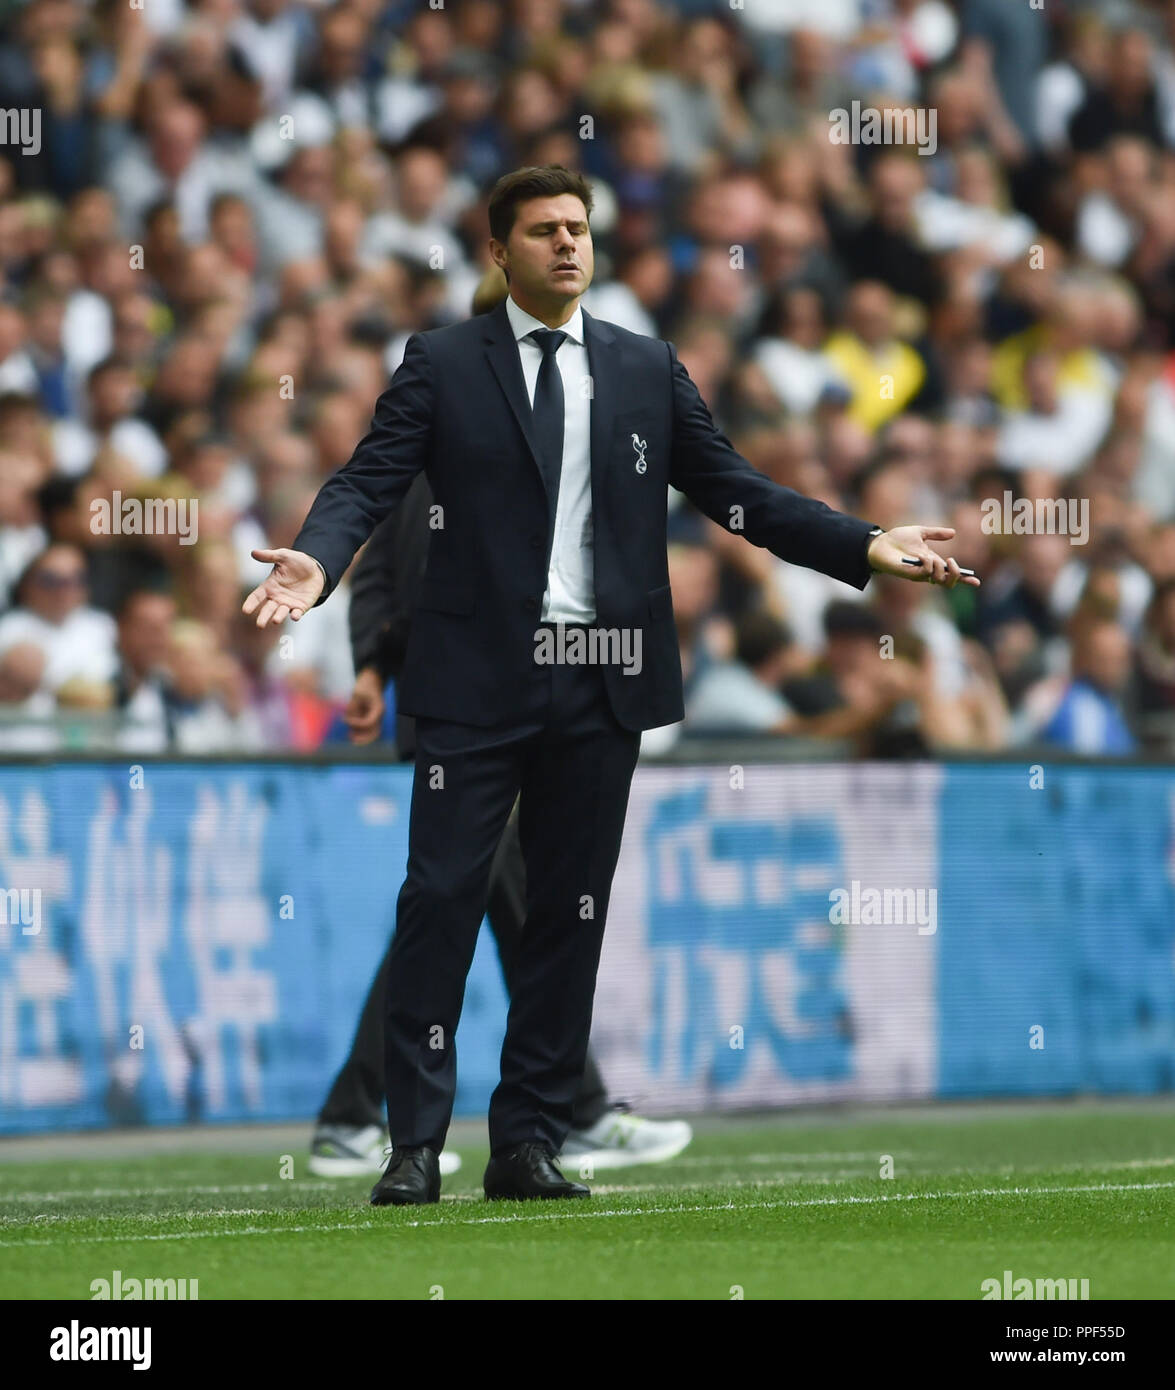 Tottenham manager Mauricio Pochettino during the Premier League match between Tottenham Hotspur and Liverpool at Wembley Stadium , London , 15 Sept 2018 Editorial use only. No merchandising. For Football images FA and Premier League restrictions apply inc. no internet/mobile usage without FAPL license - for details contact Football Dataco Stock Photo